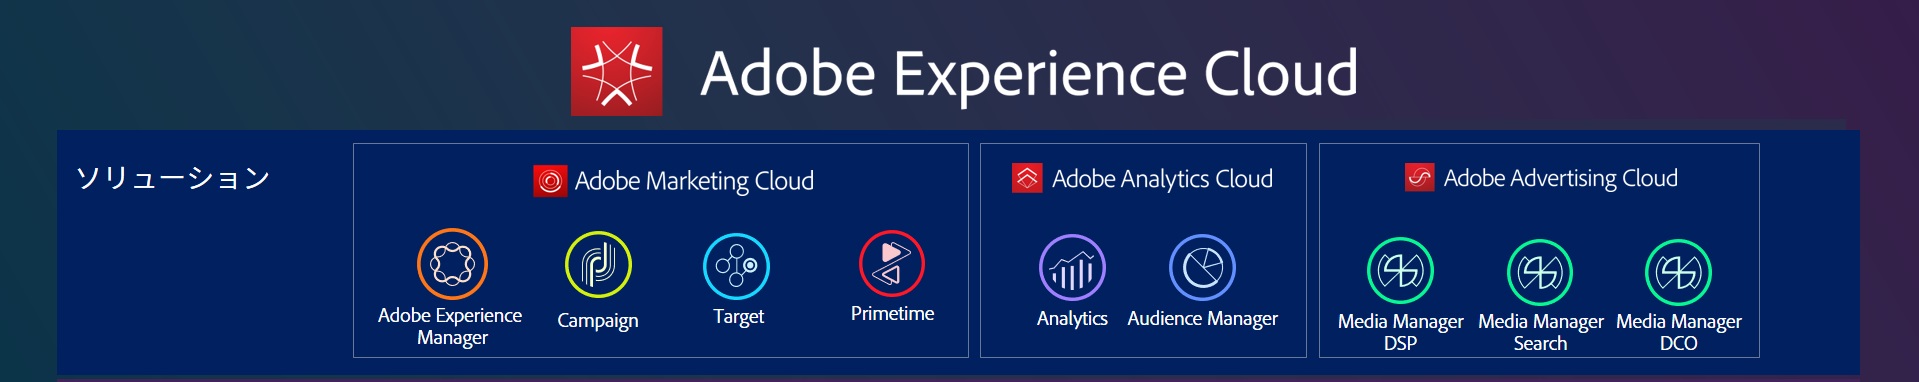 Adobe Experience Manager とは？